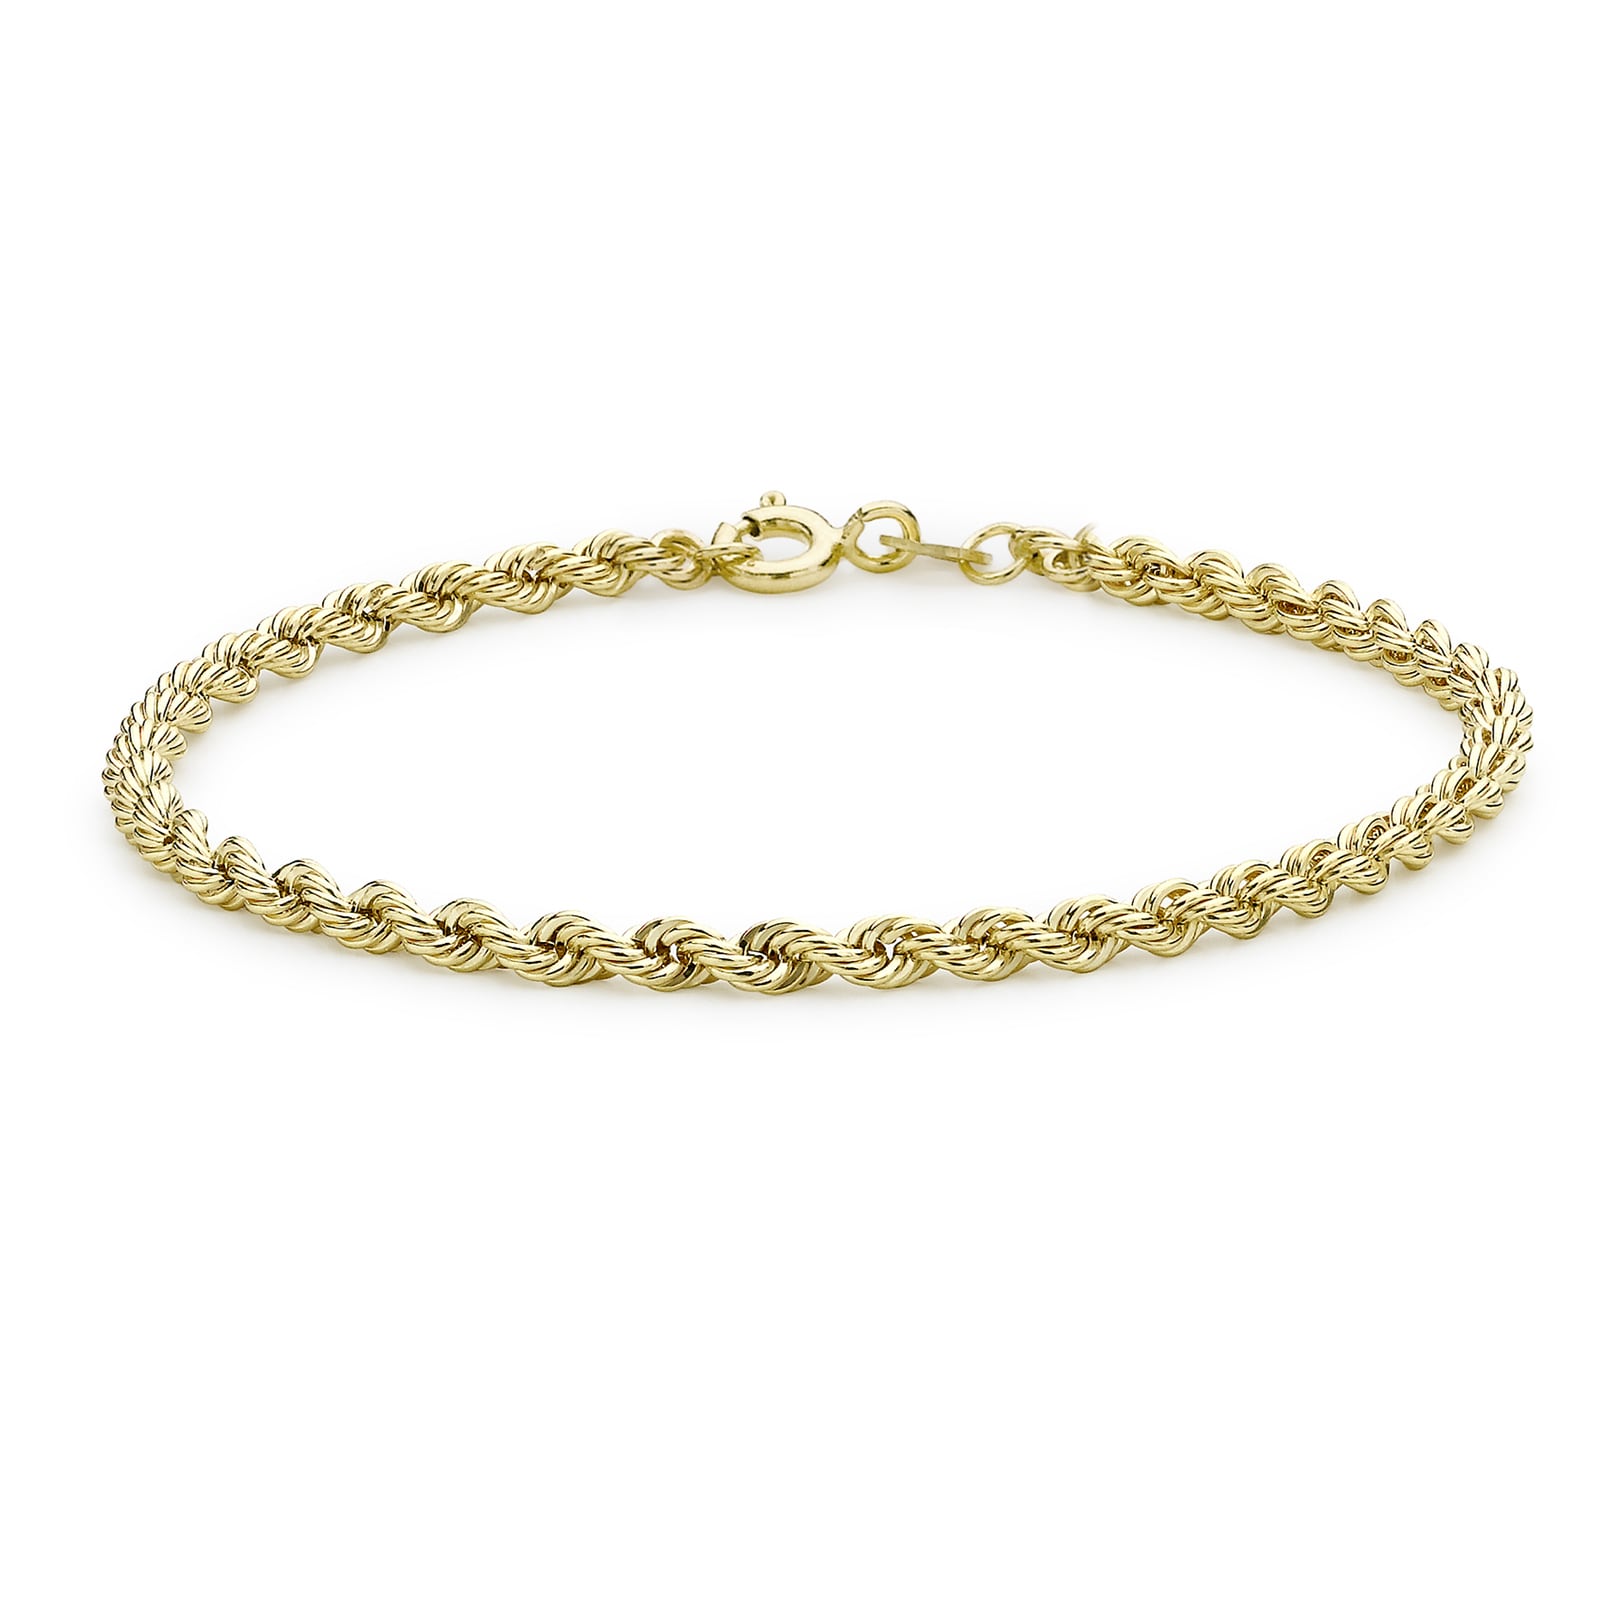 9ct Yellow and White Gold U Bracelet With Alternating Links  Womens from  Avanti of Ashbourne Ltd UK